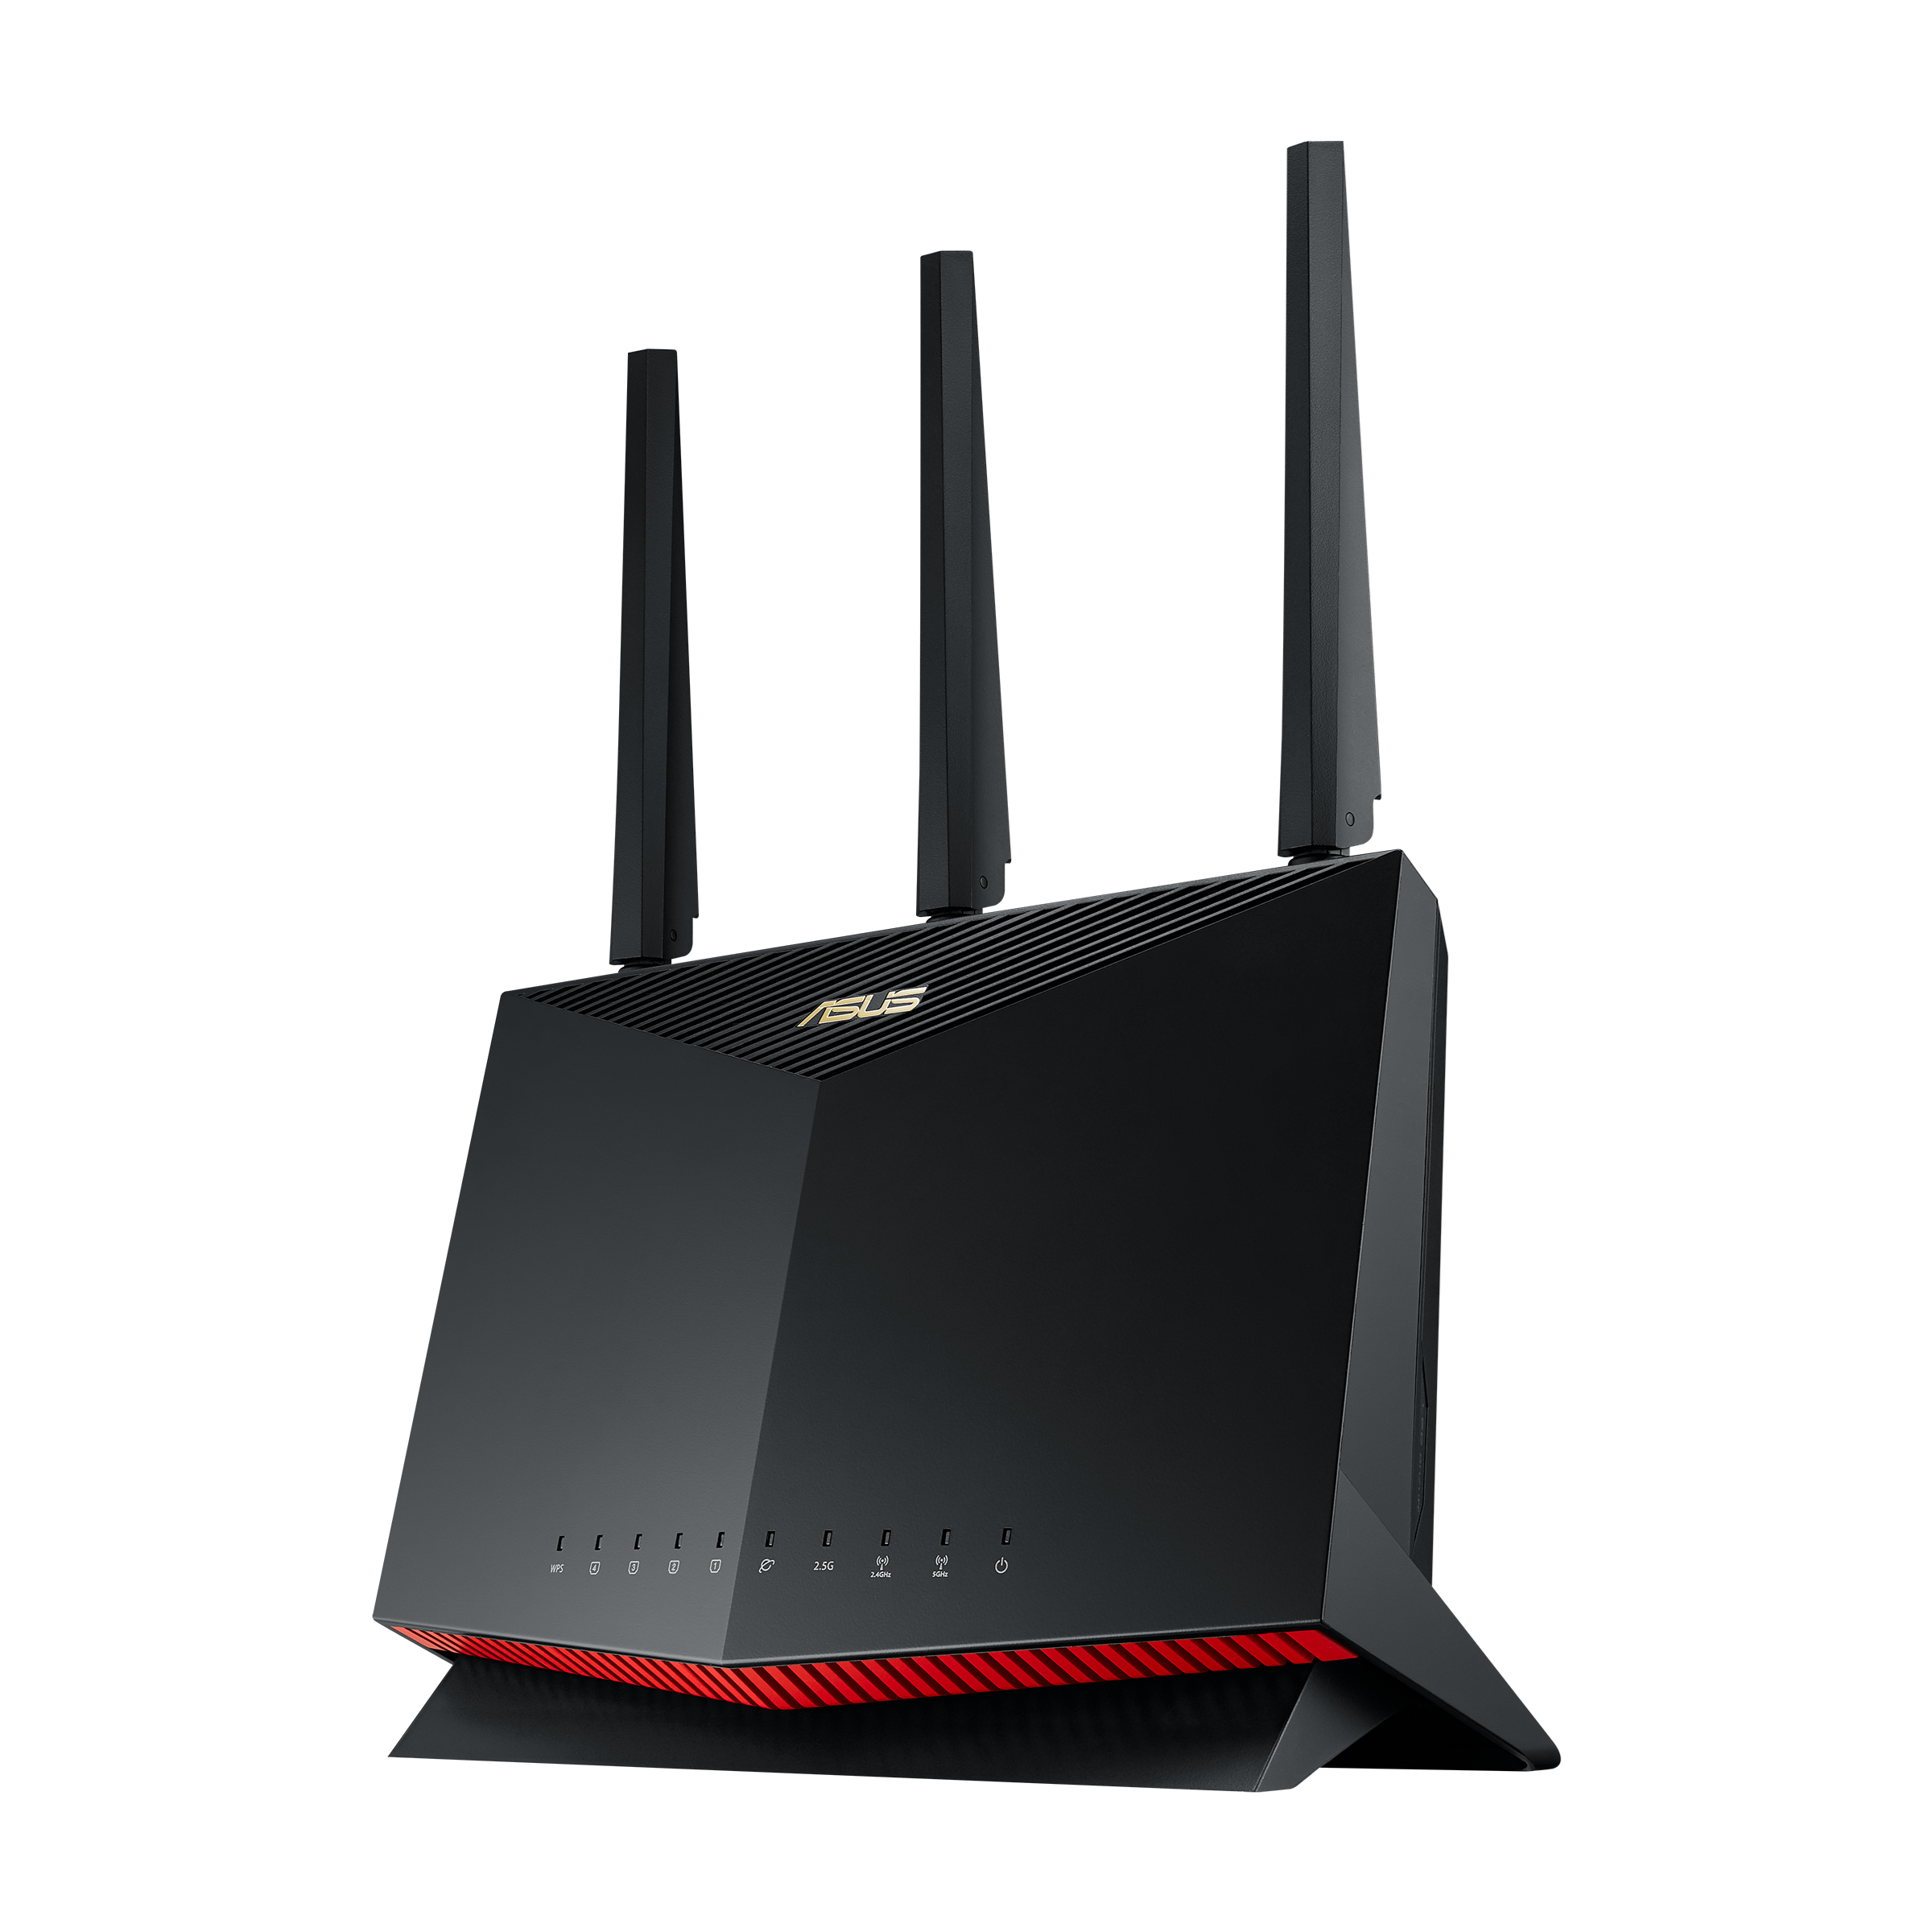 Mose indstudering barmhjertighed ASUS WiFi Routers｜WiFi Routers｜ASUS Global